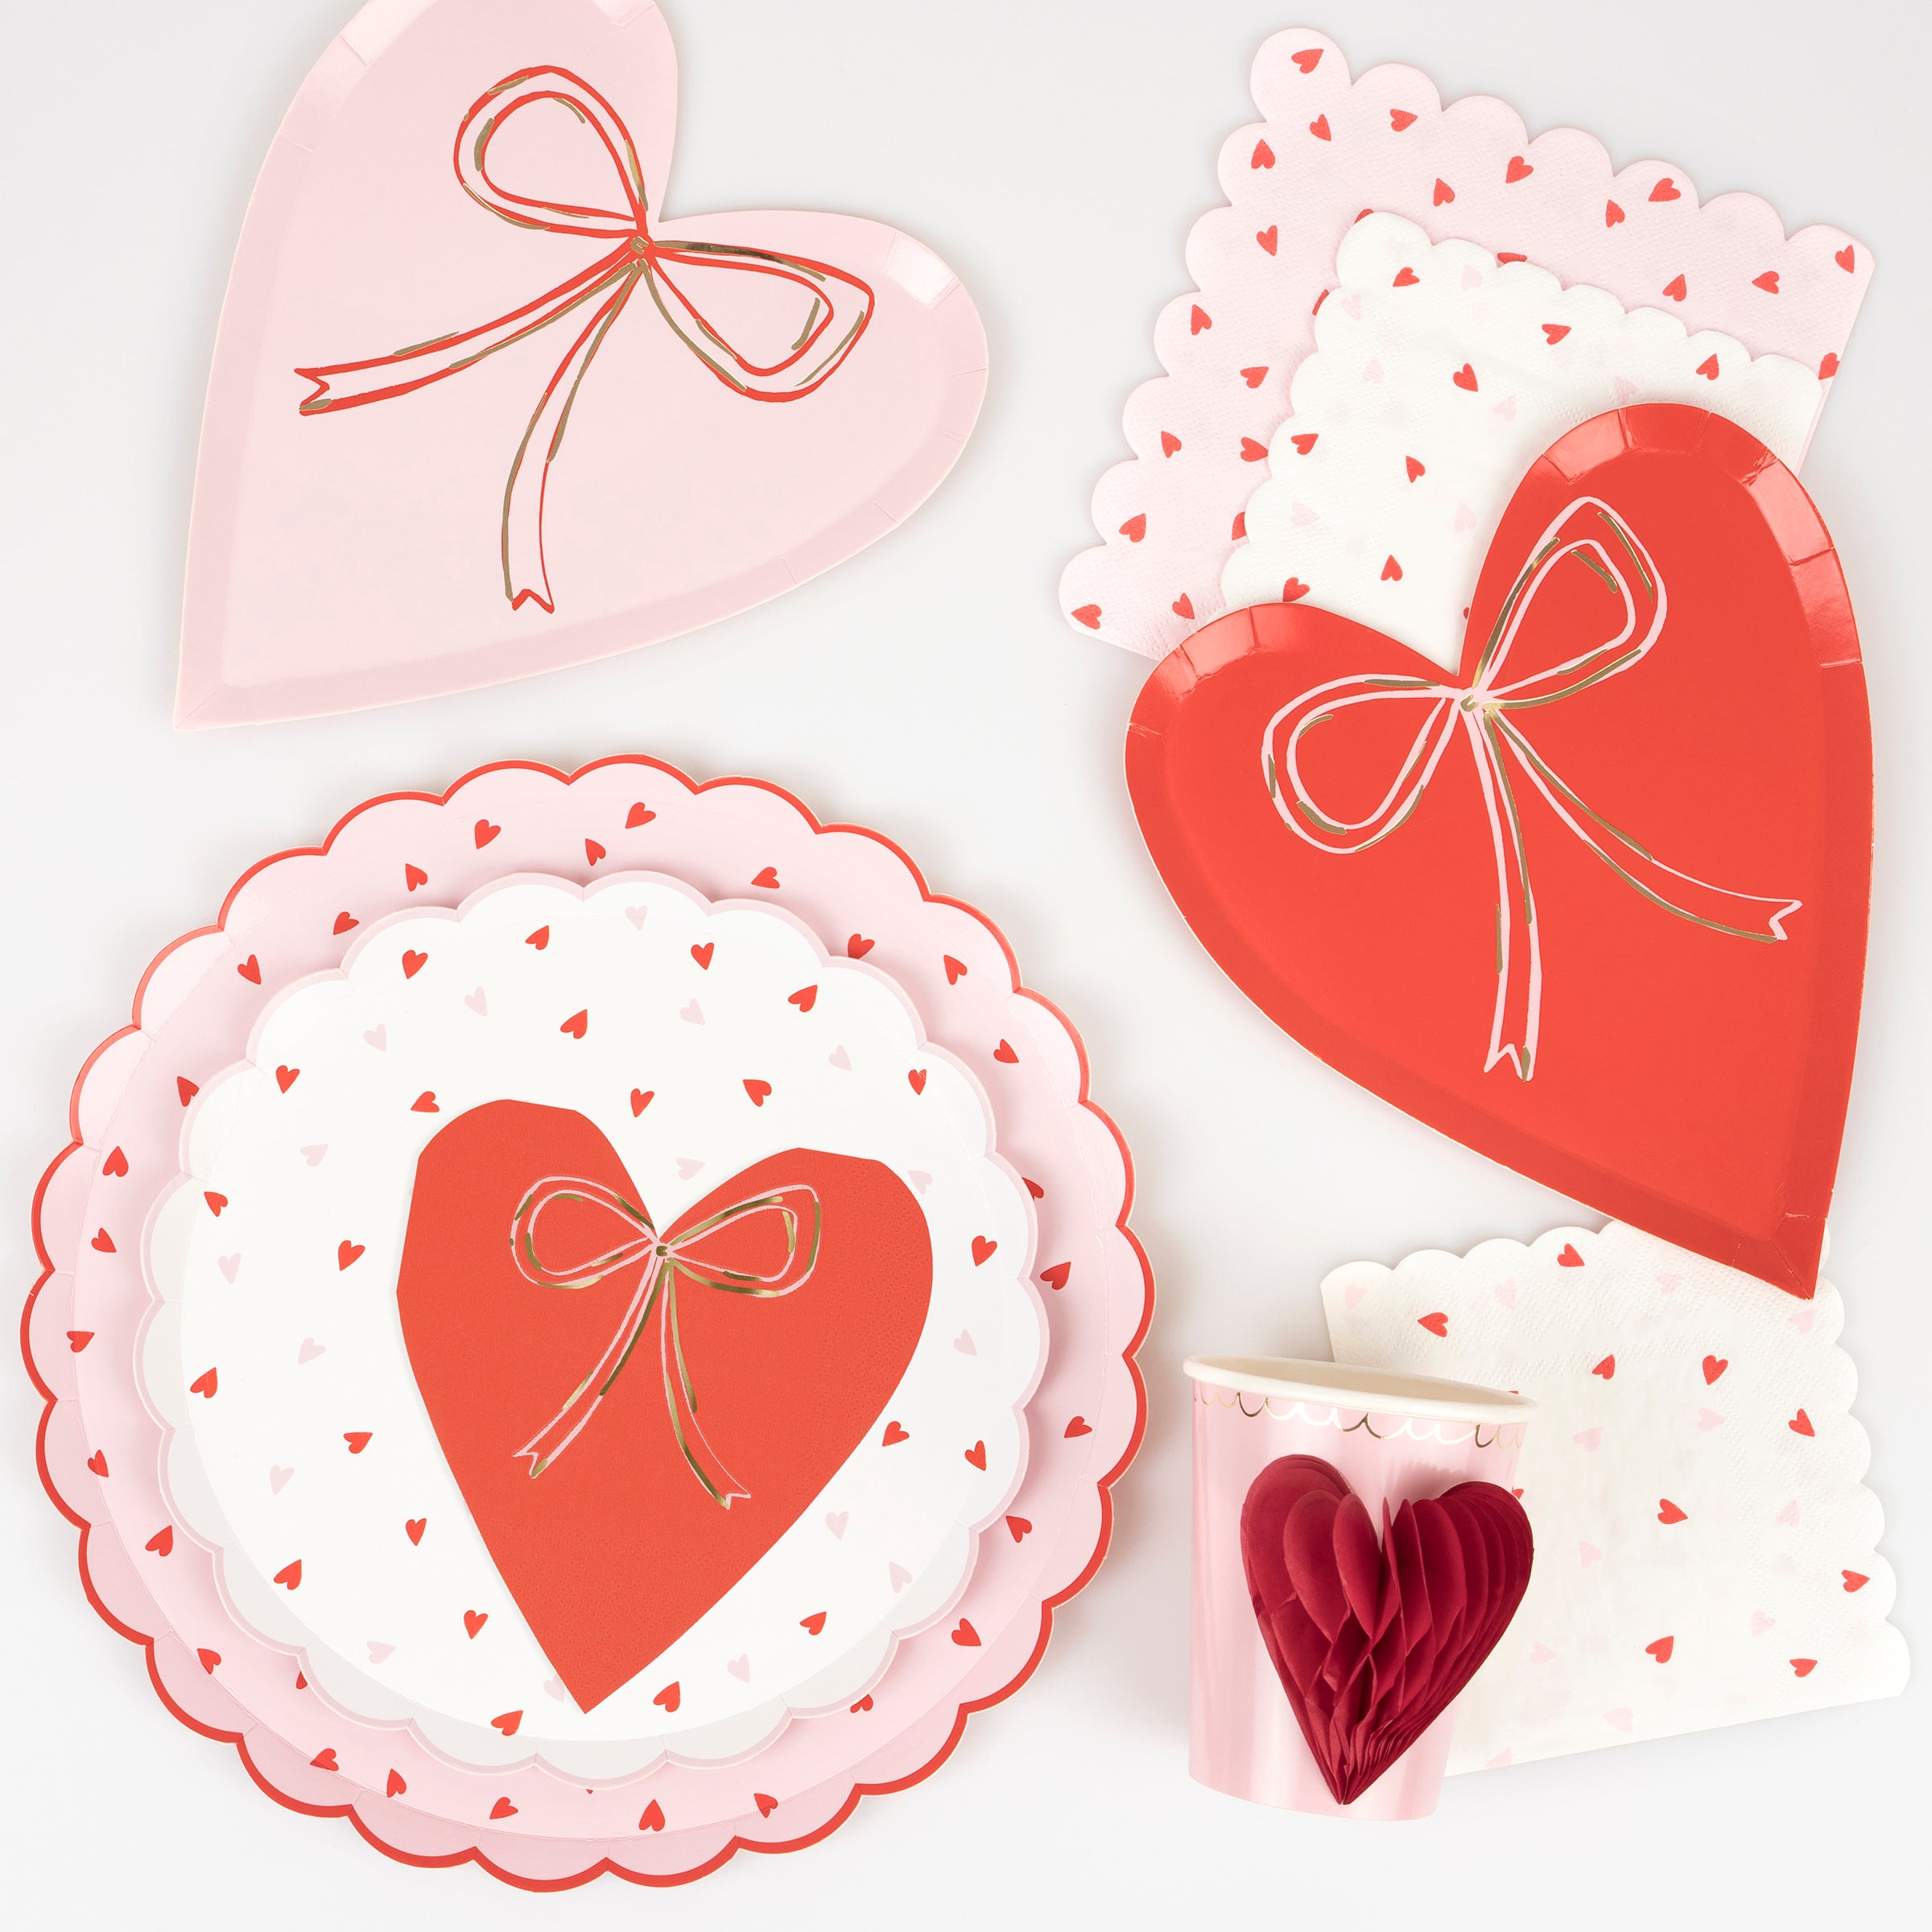 Our party plates, with hearts and a scalloped edge, are stylish for a romantic meal.